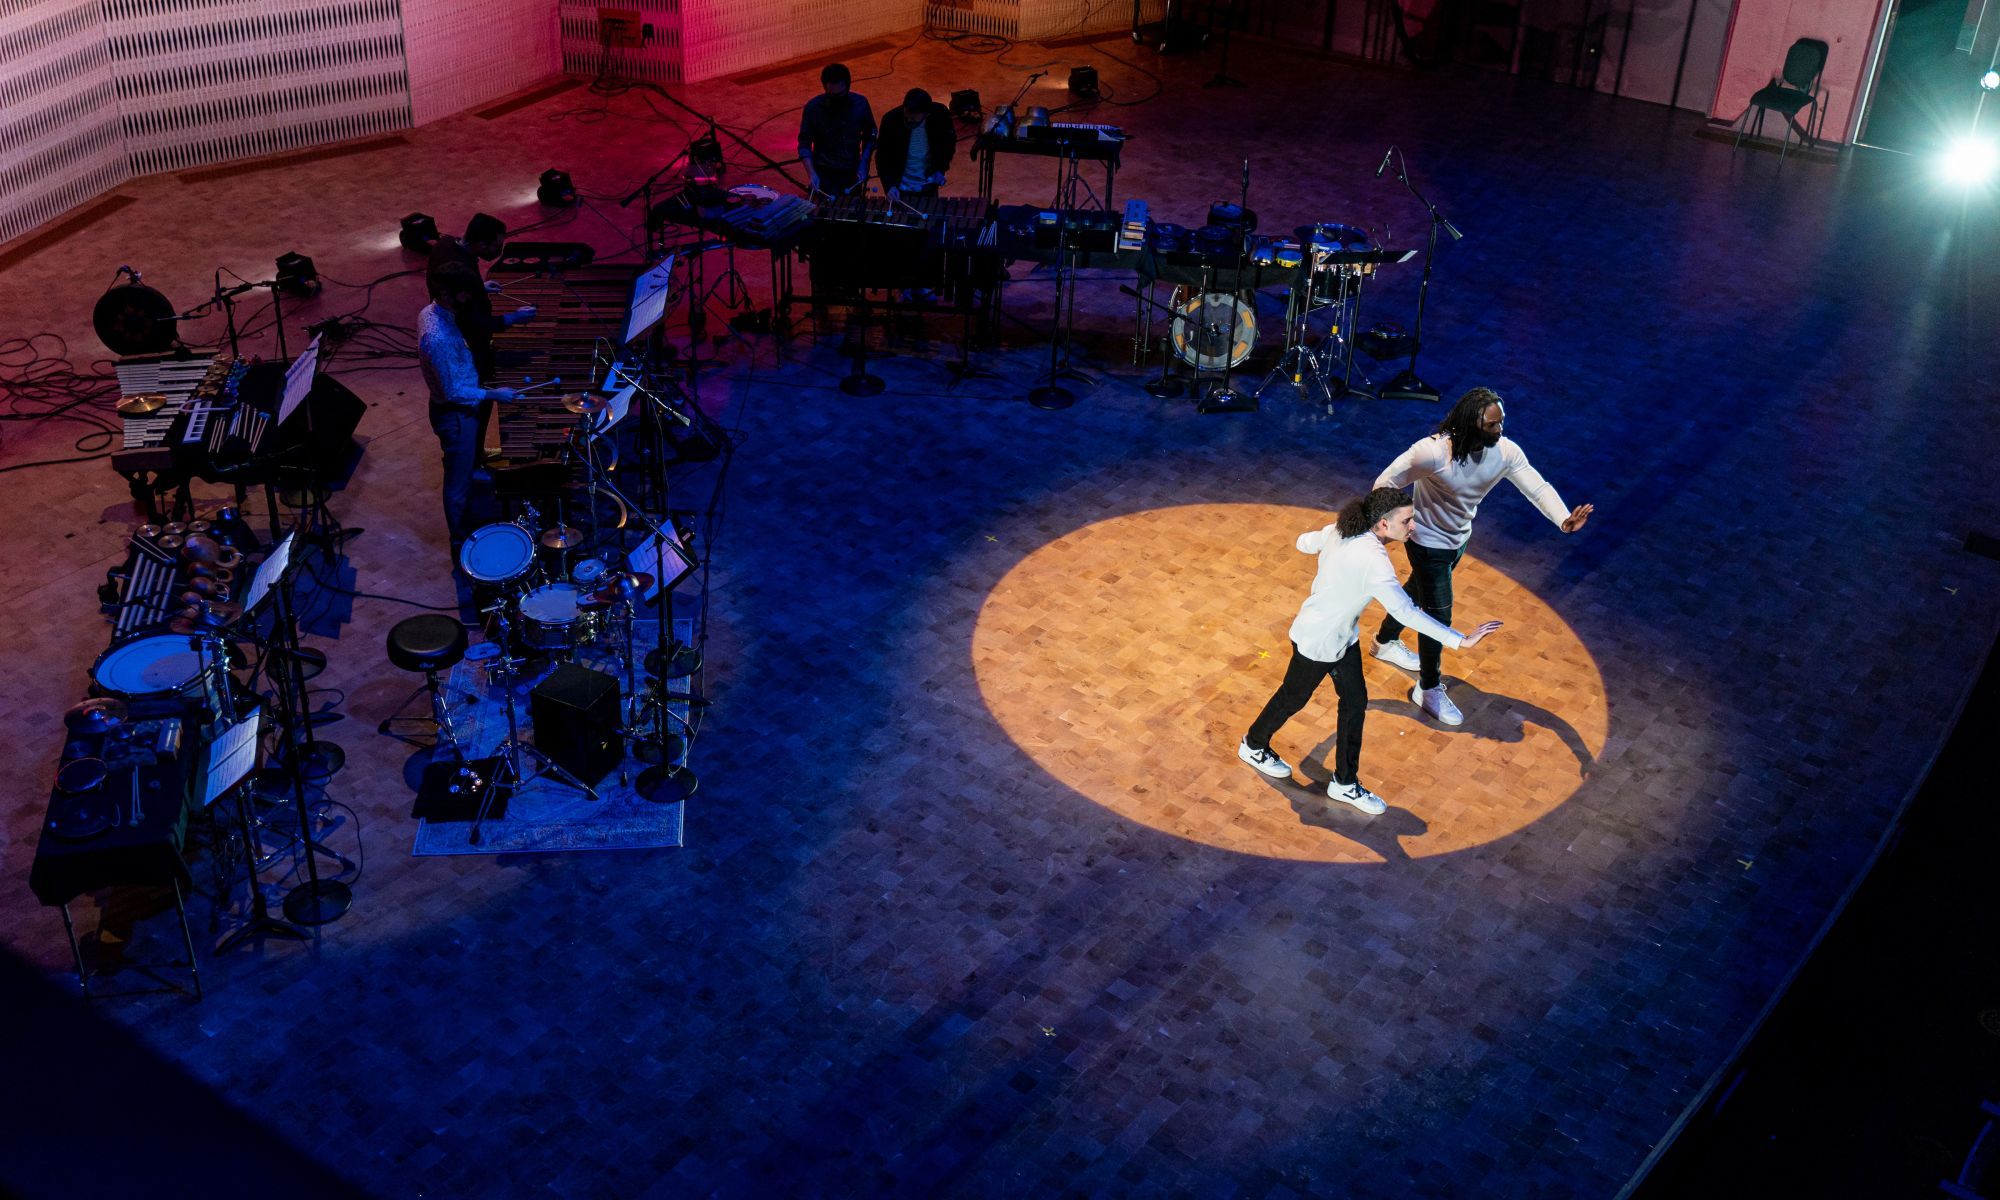 Two dancer dressed in white long sleeved shirts and black skinny jeans with white sneakers raise one arm forward, facing the audience